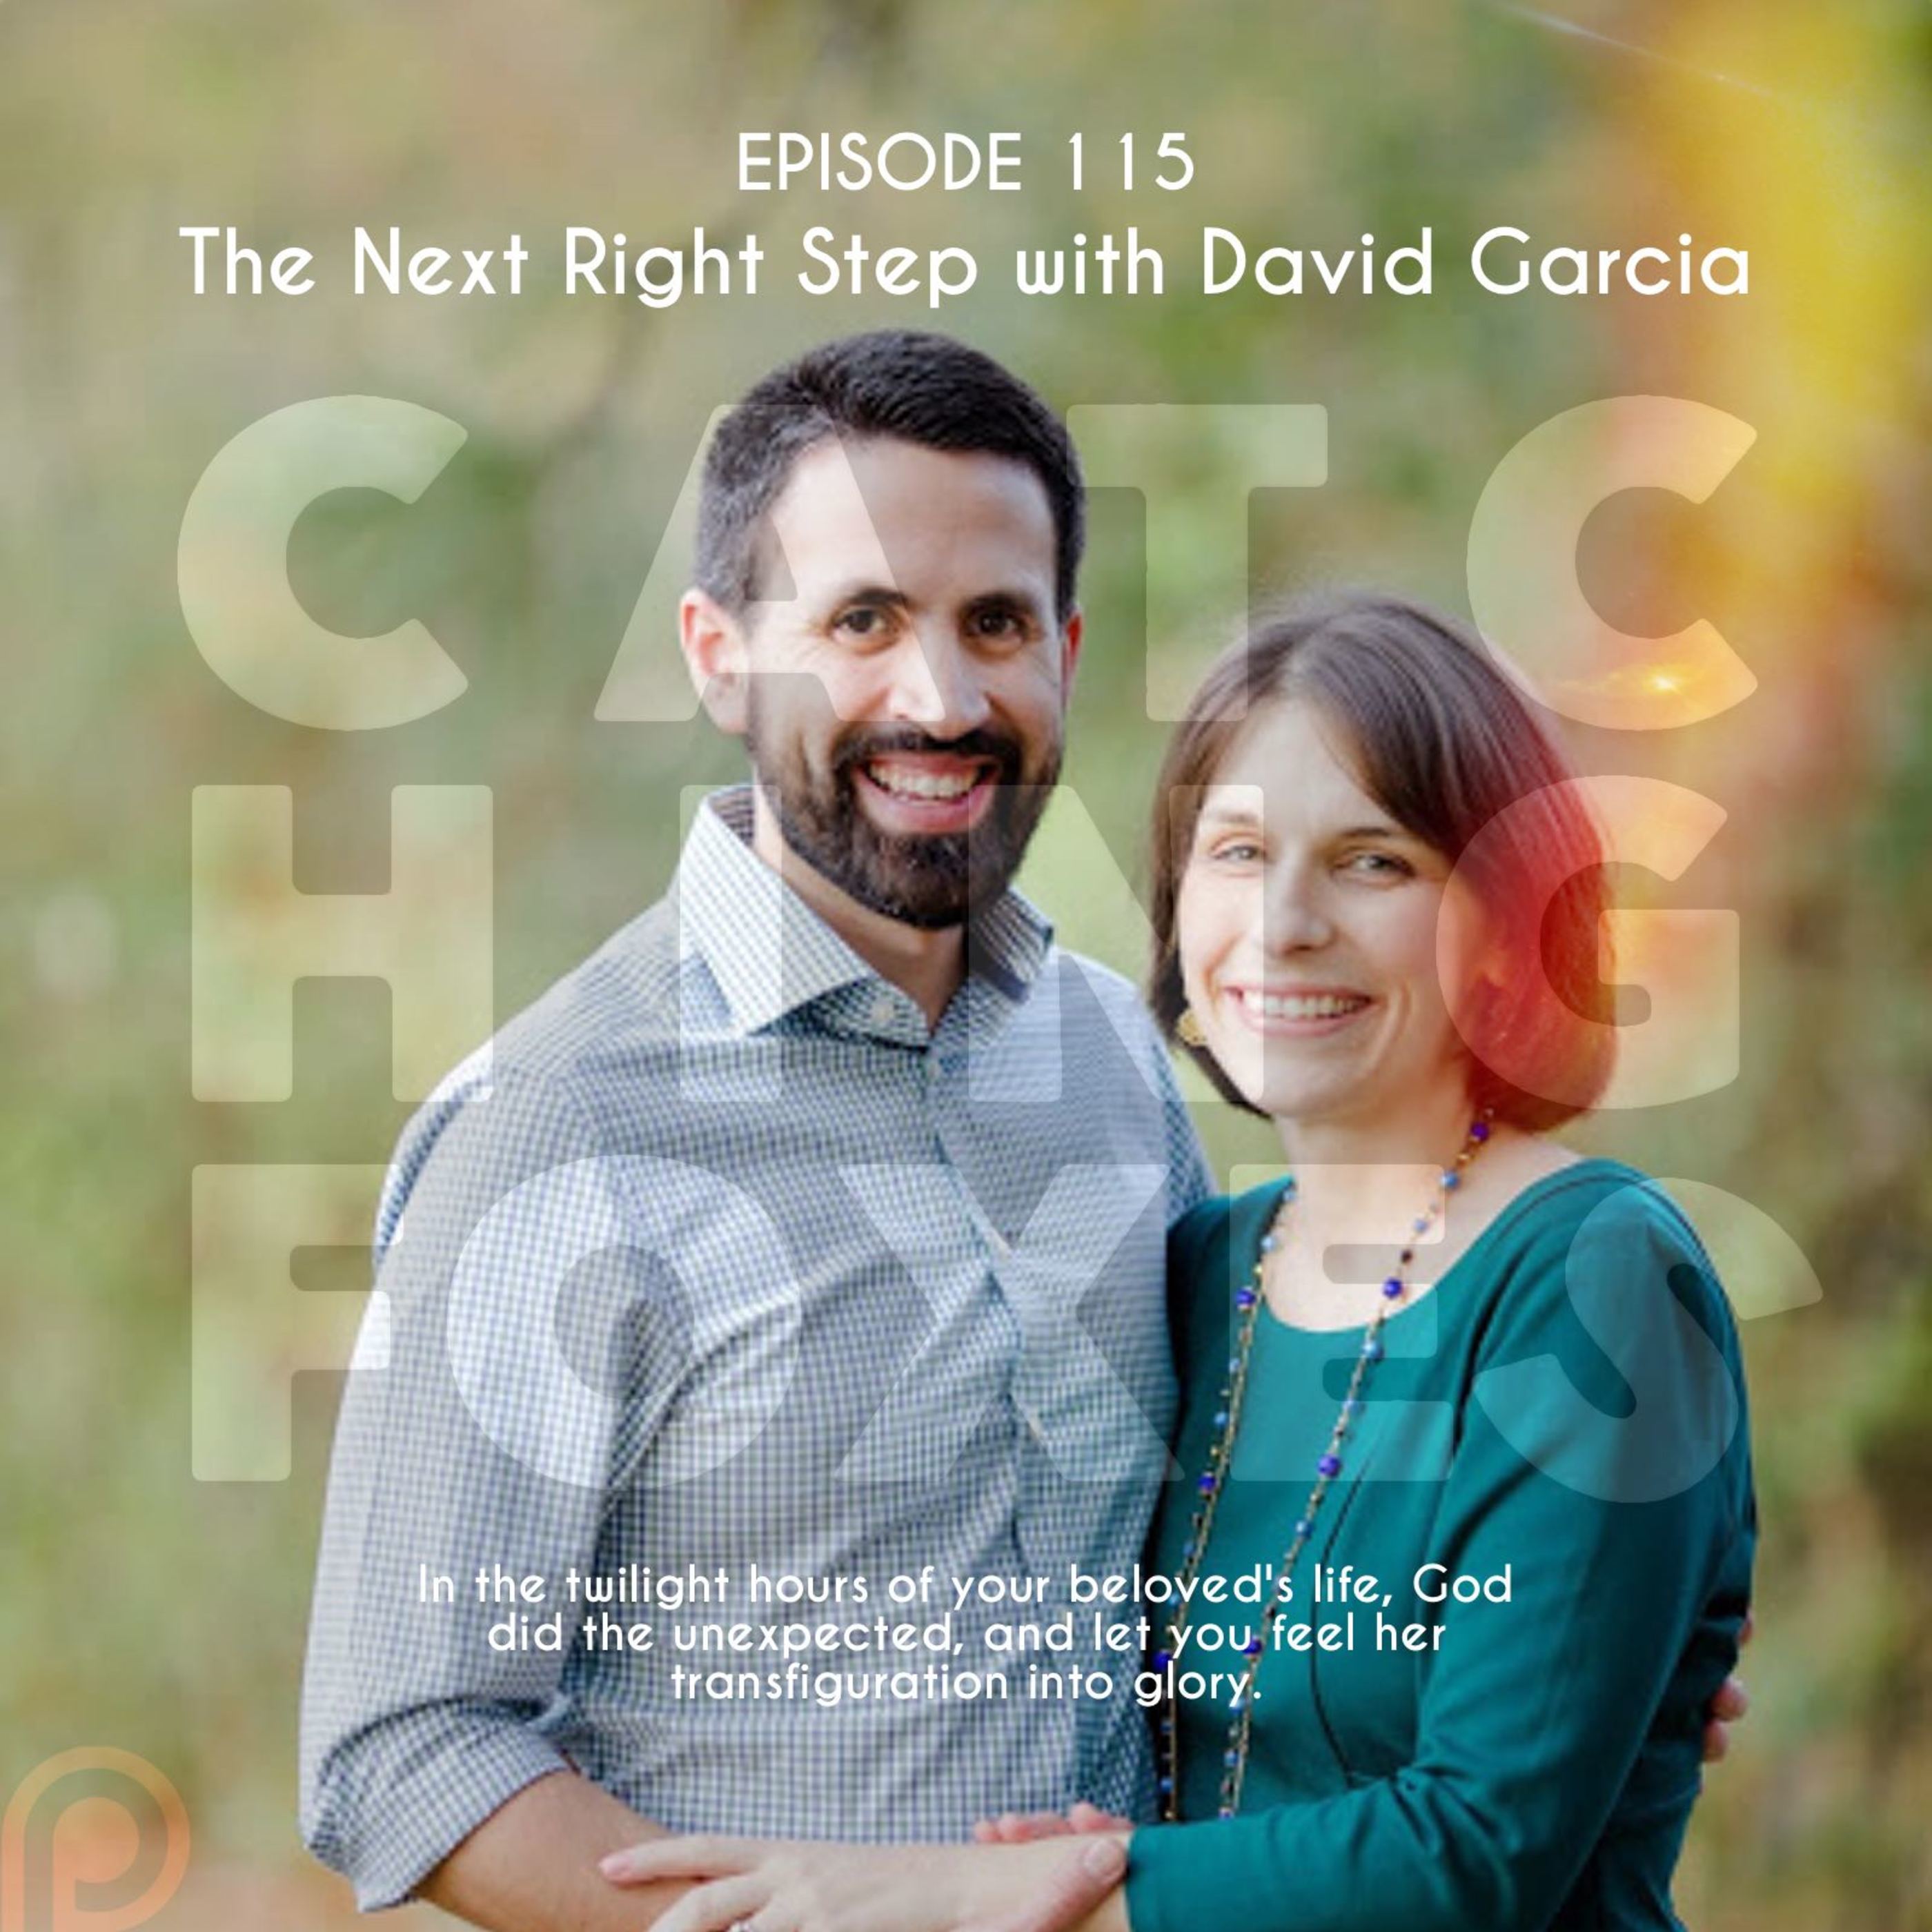 The Next Right Step with David Garcia